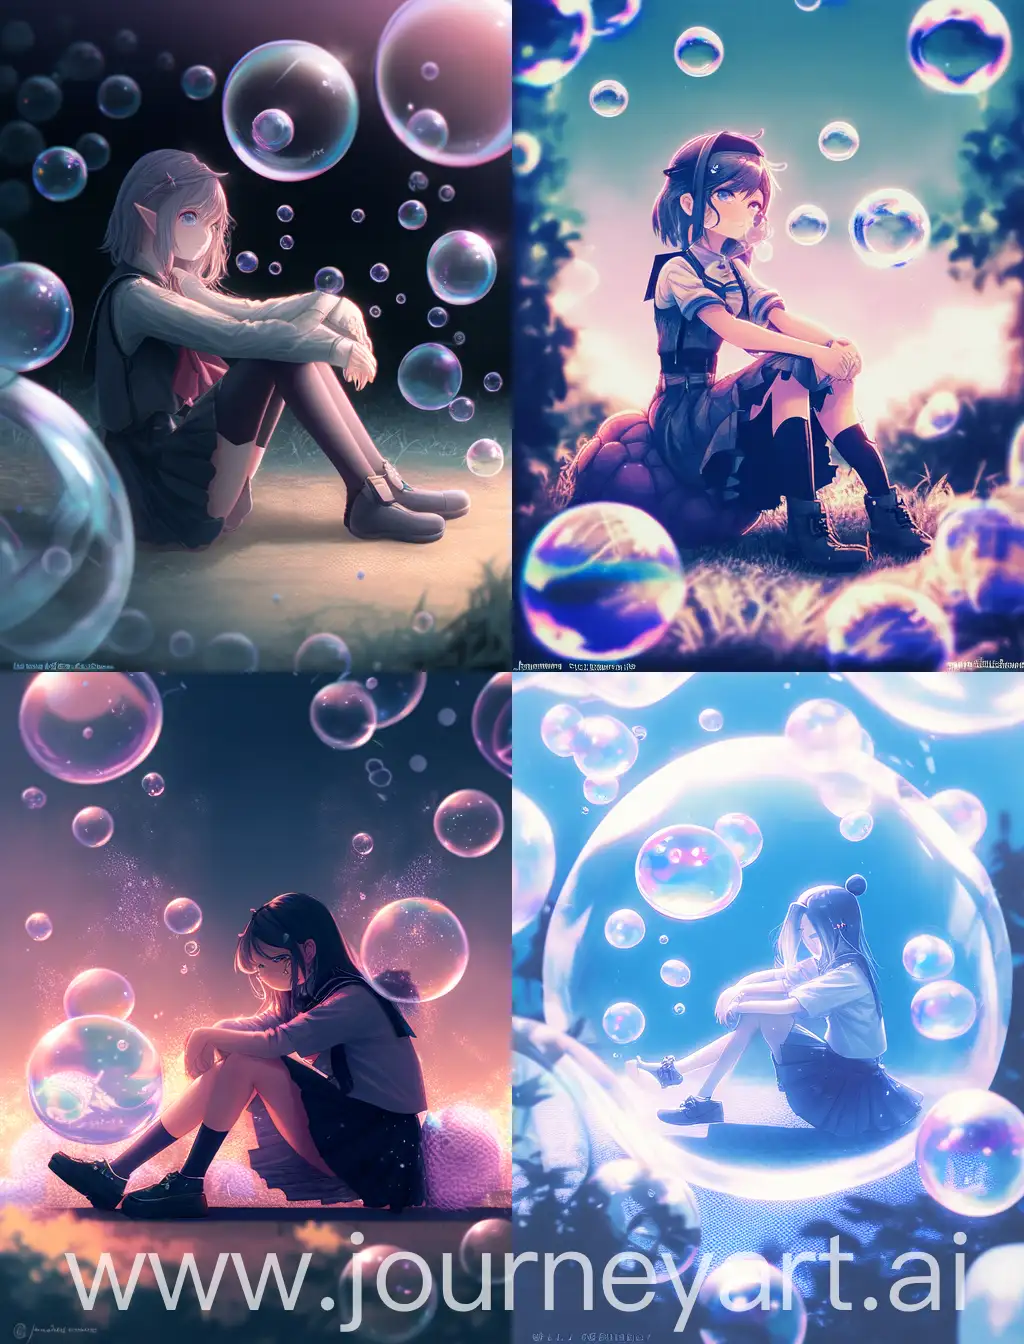  A girl sitting on the ground in front of a bubble, bubble goth , water bubble, bubble soap , add some watermarks like bubbles fishes etc, make it look beautiful add some special characteristics to the image